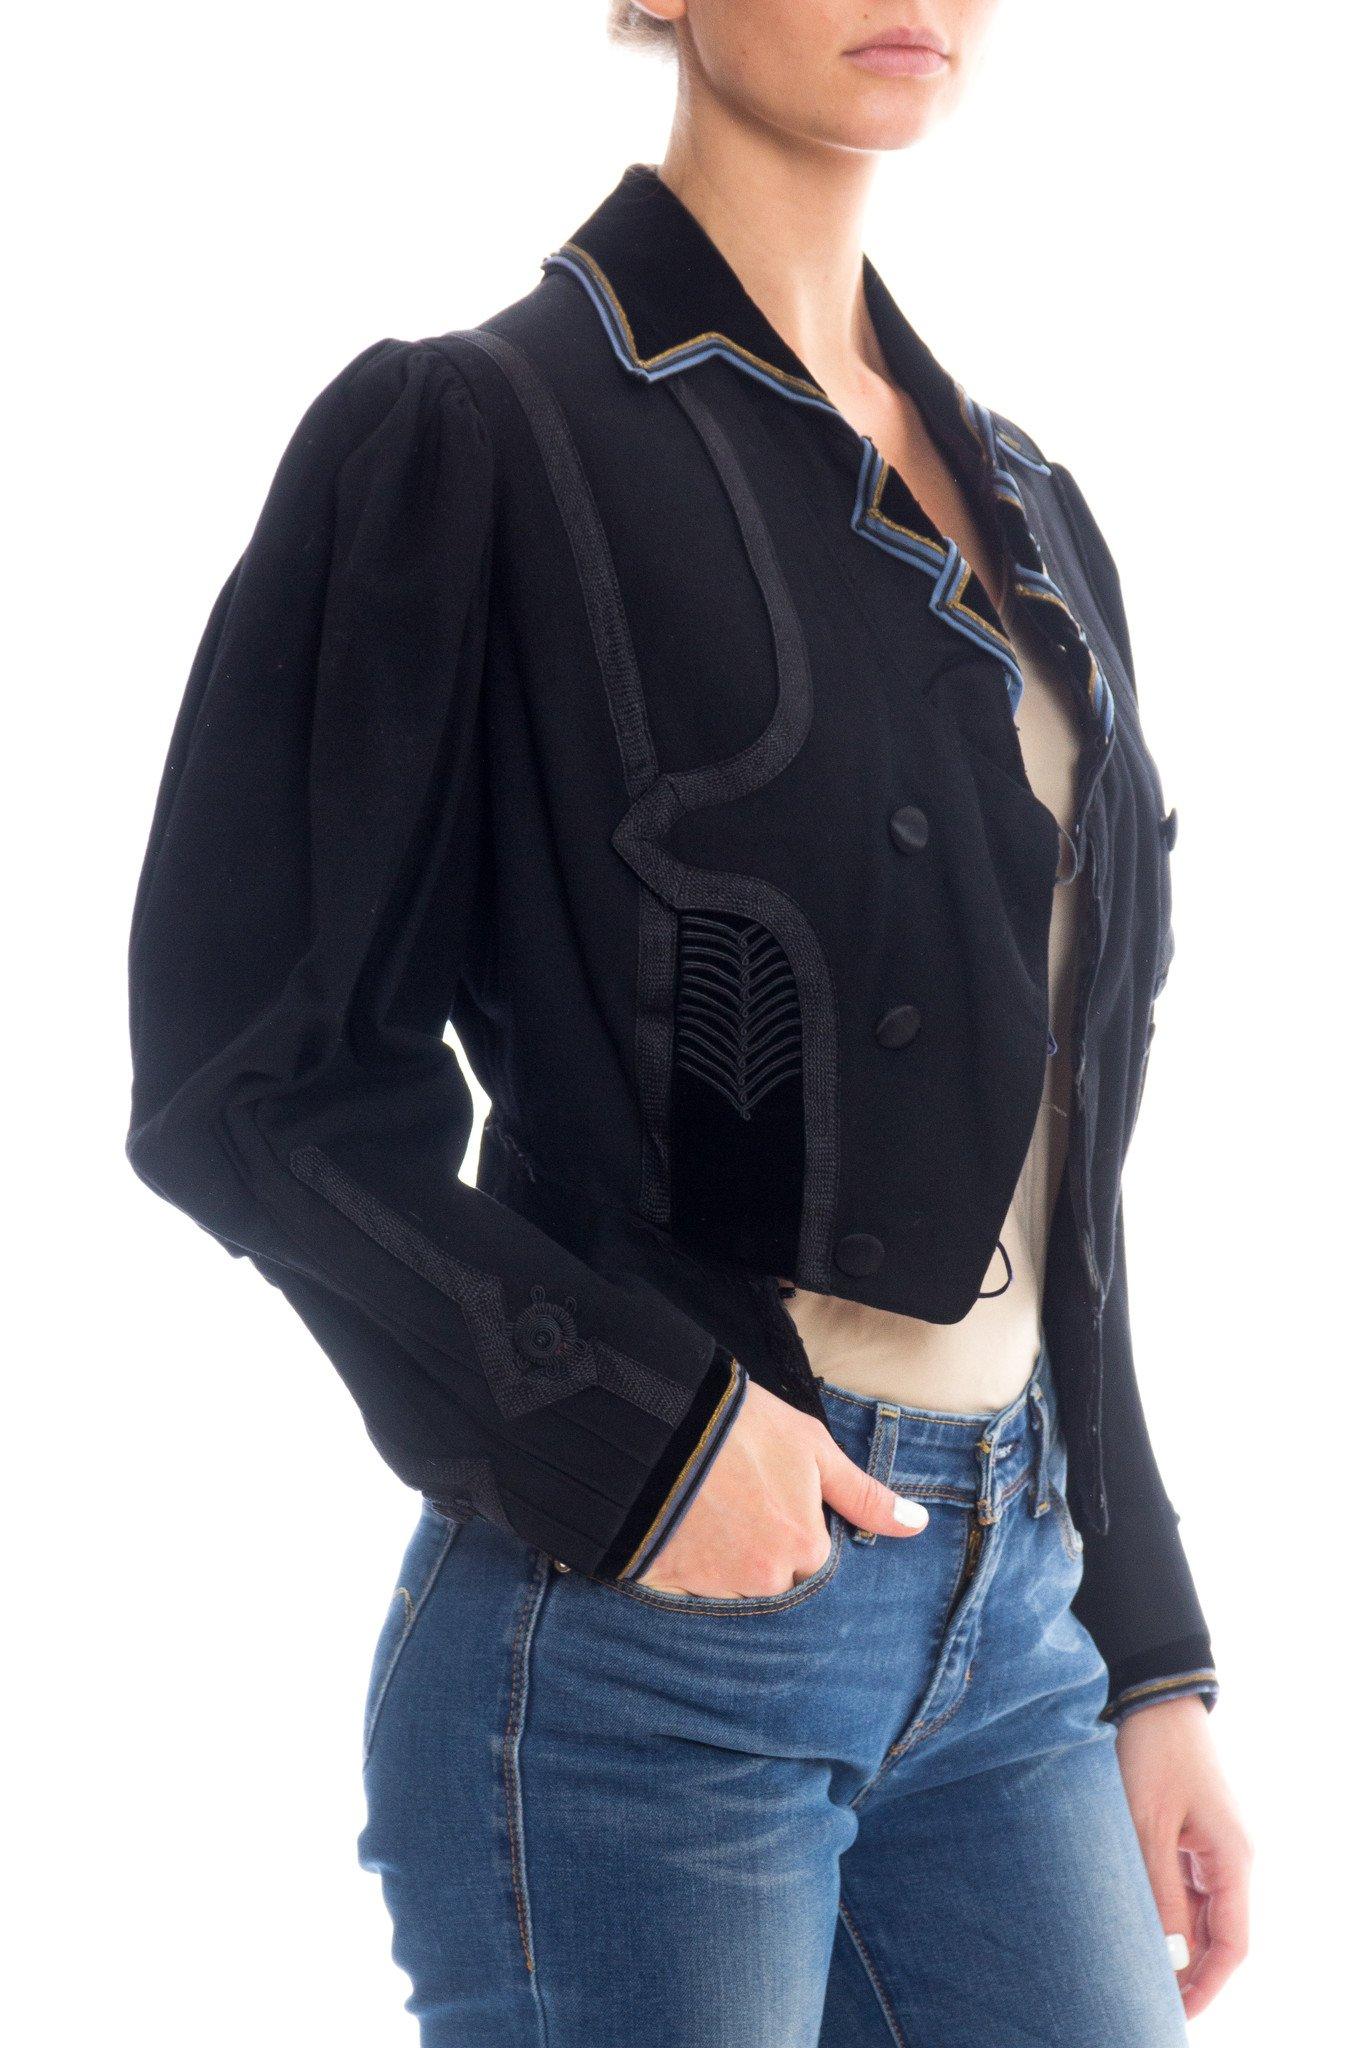 Victorian Black & Blue Wool Newly Lined Jacket With Military Inspired Details 1